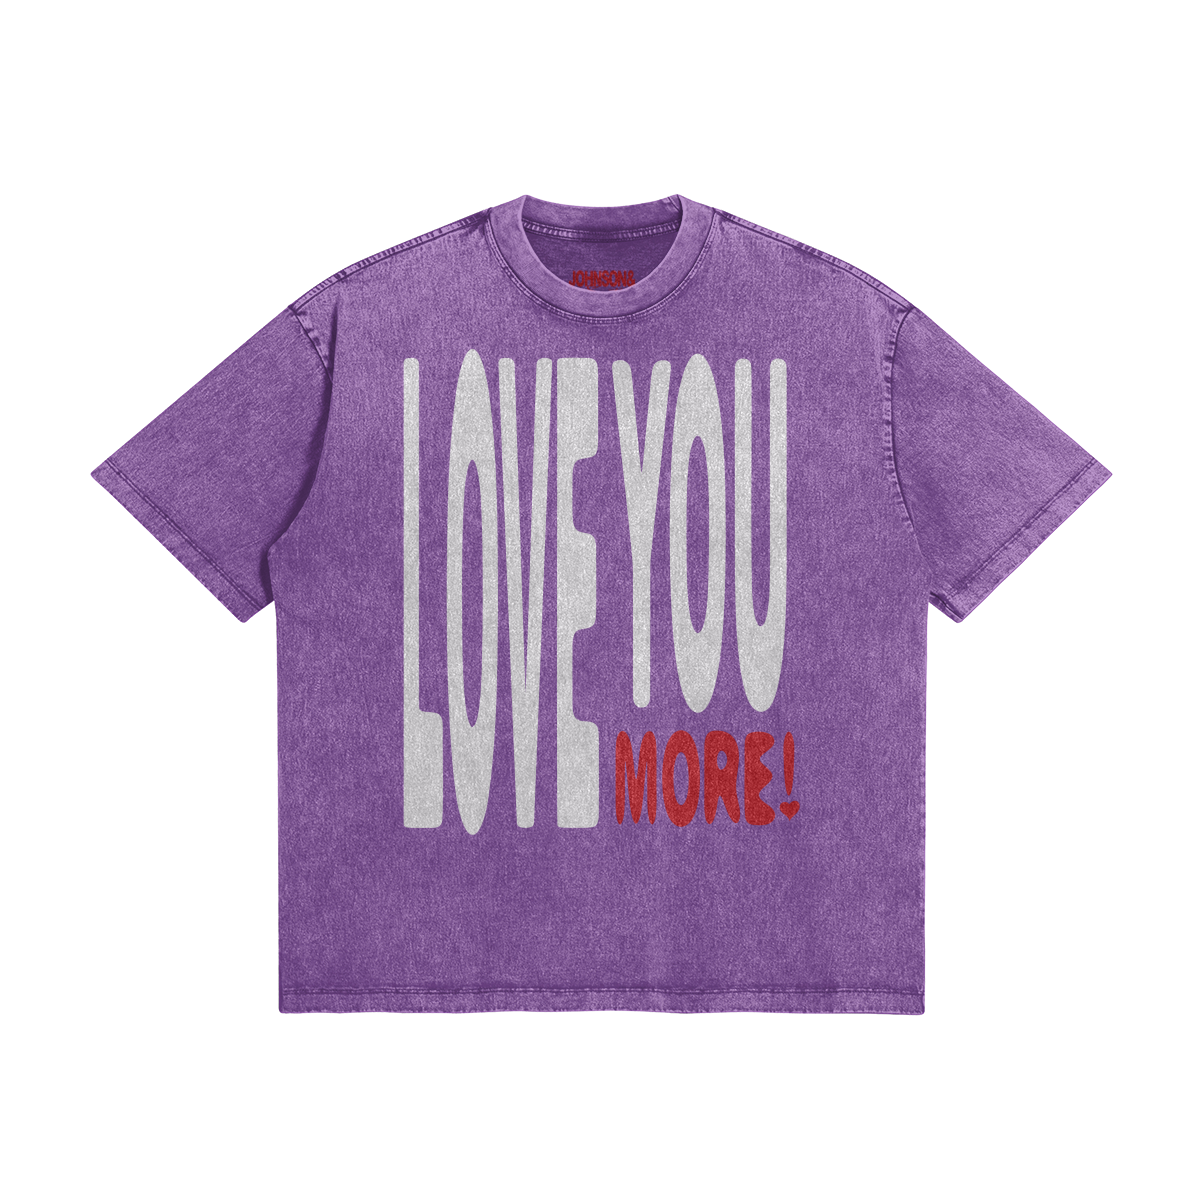 LOVE YOU MORE T-SHIRT